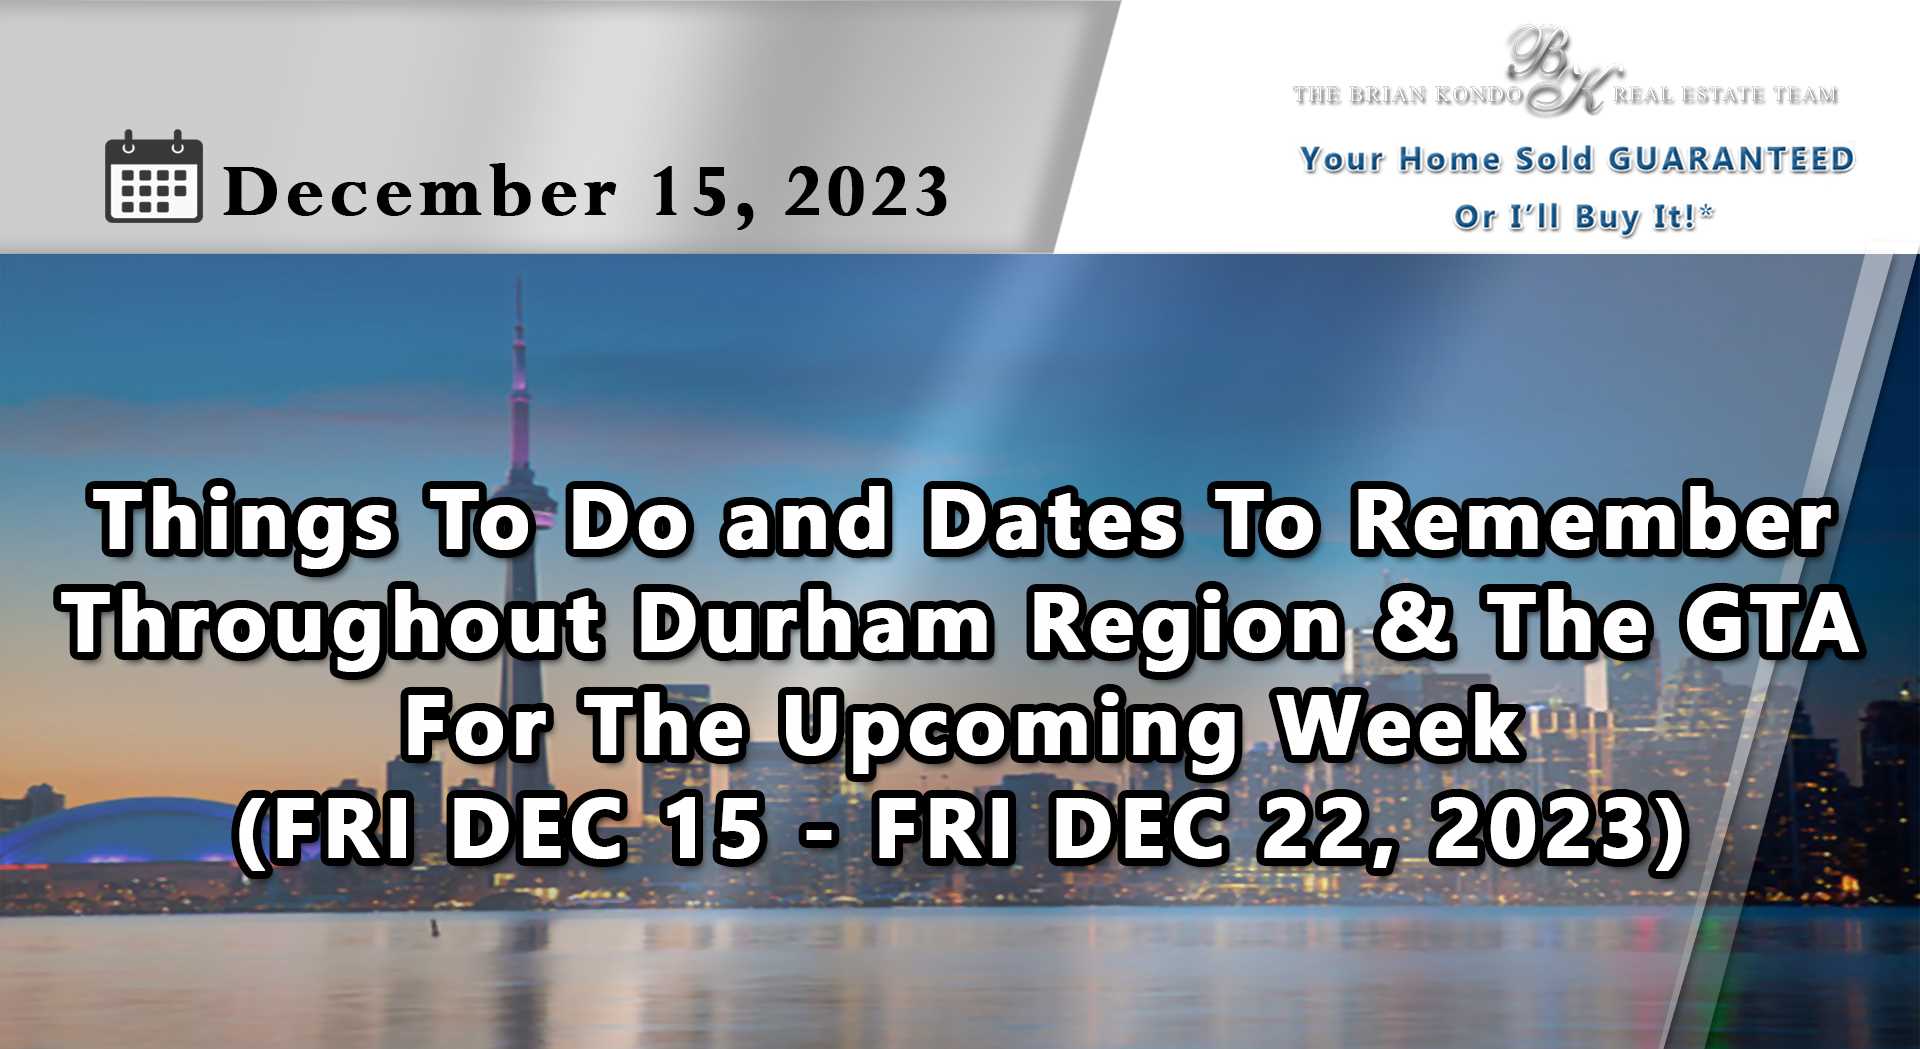 Things To Do and Dates To Remember Throughout Durham Region and The GTA For The Upcoming Week (FRI DEC 15 - FRI DEC 22, 2023)